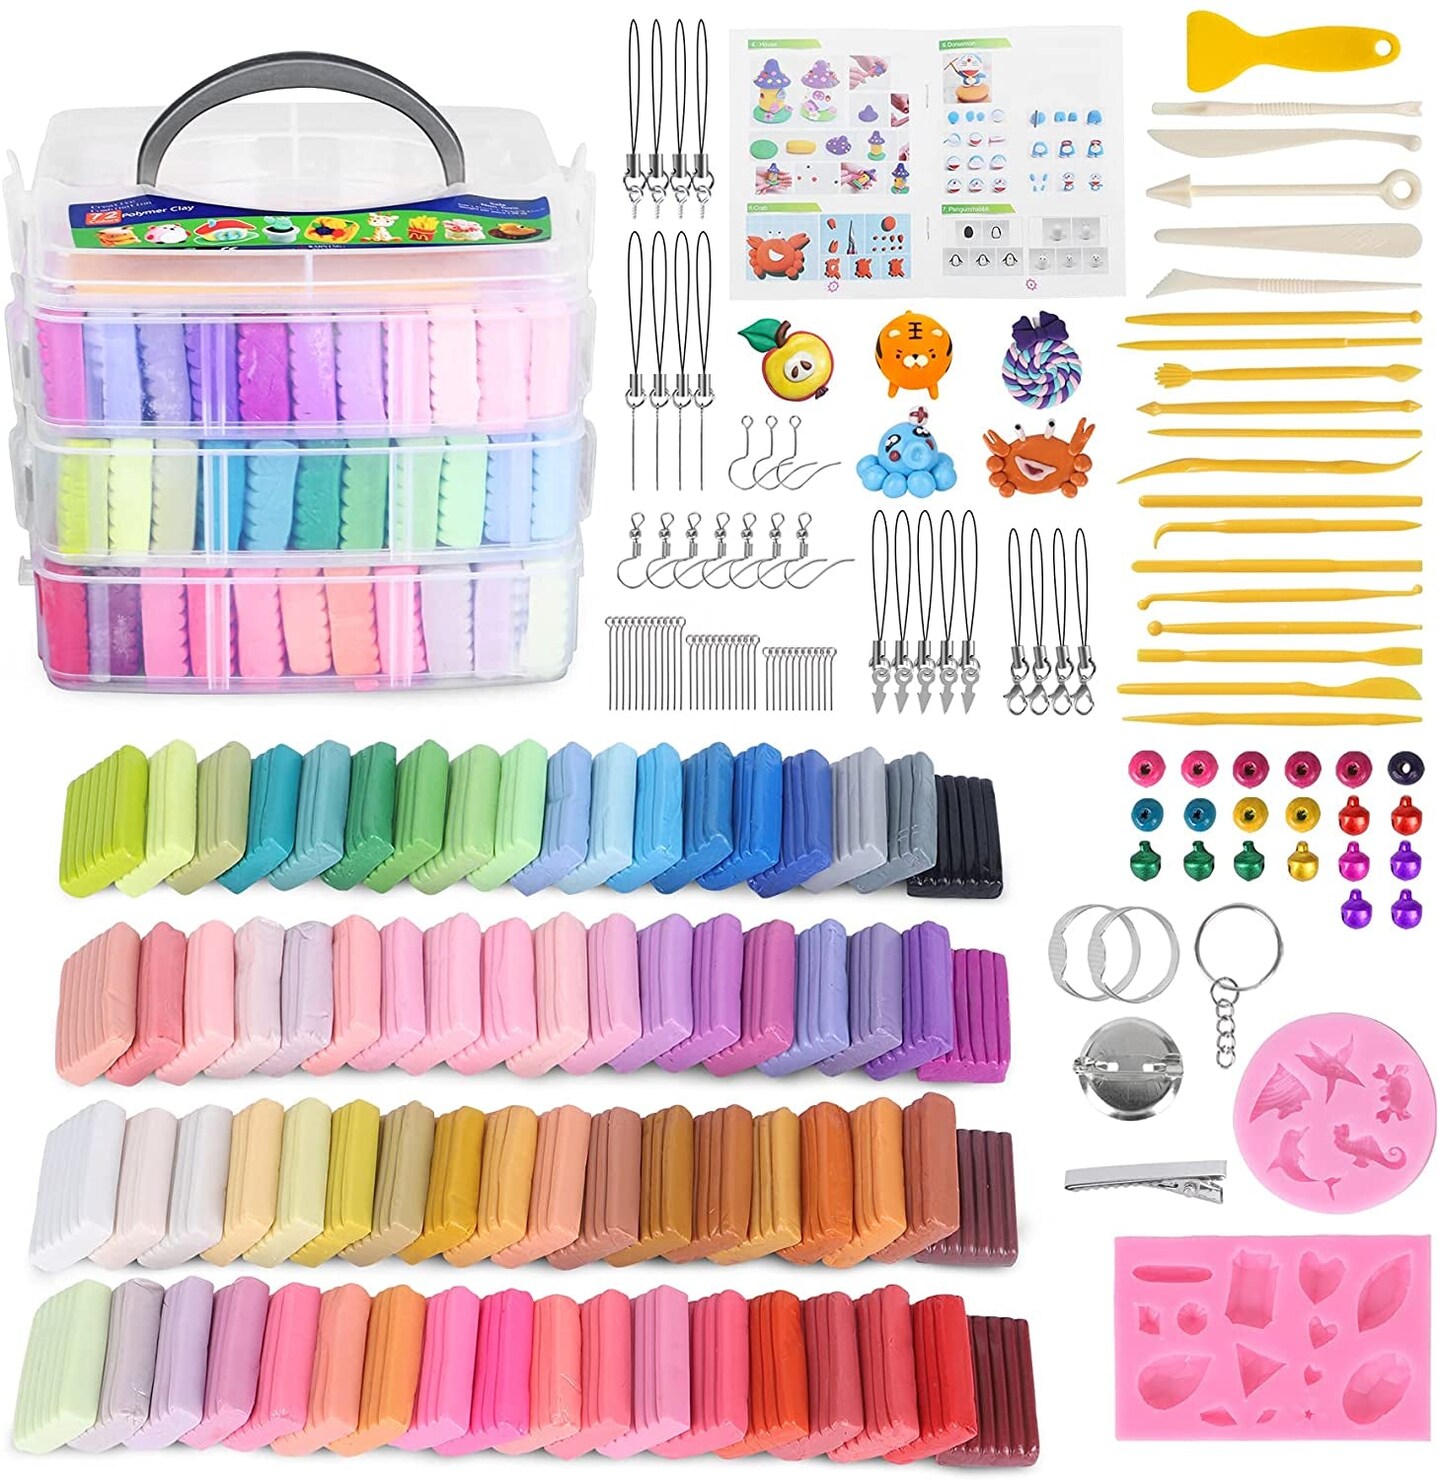 Polymer Clay 50 Colors, Modeling Clay for Kids DIY Starter Kits, Oven Baked  Model Clay, Non-Toxic, Non-Sticky,With Sculpting Tools, Gift for Children